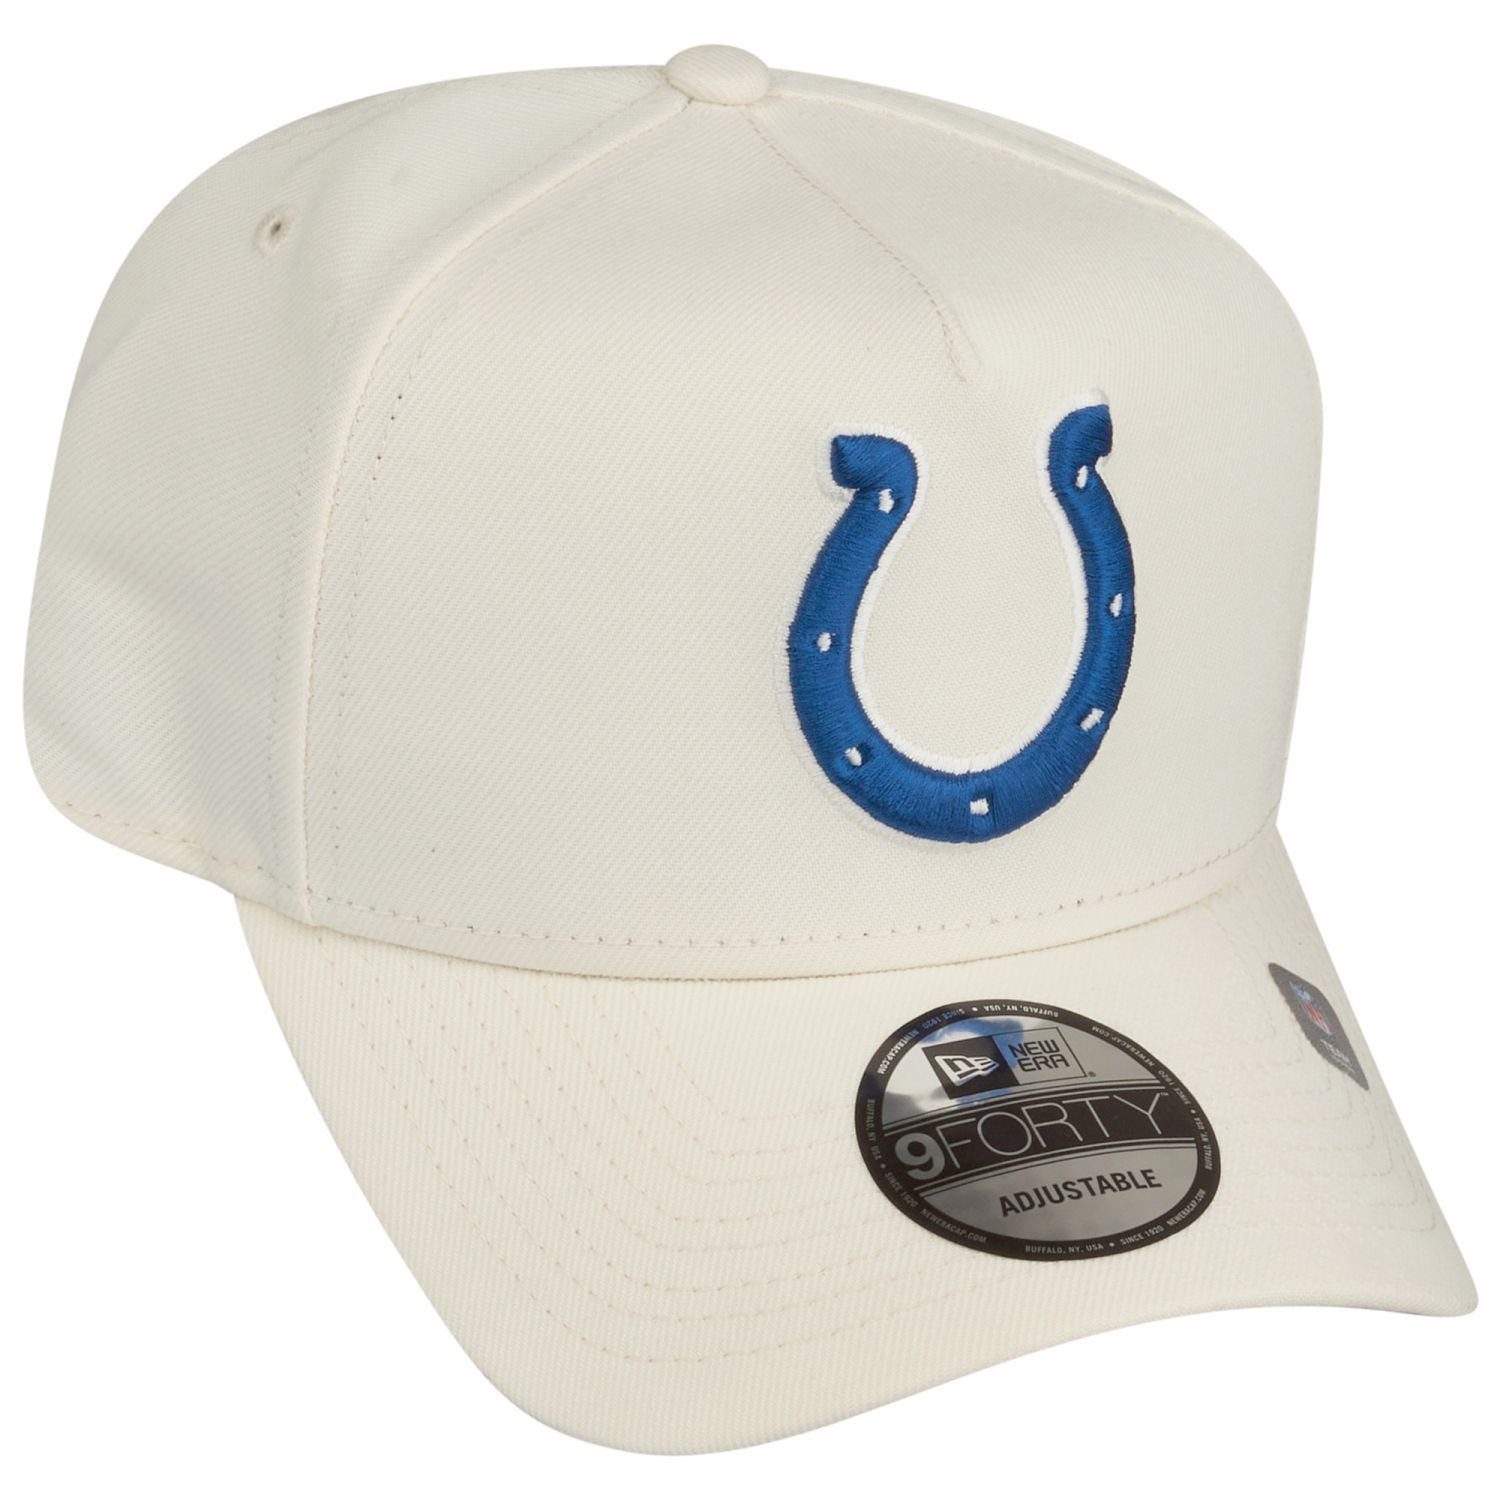 Cap Colts Era AFrame Trucker New Indianapolis TEAMS 9Forty Trucker white NFL chrome